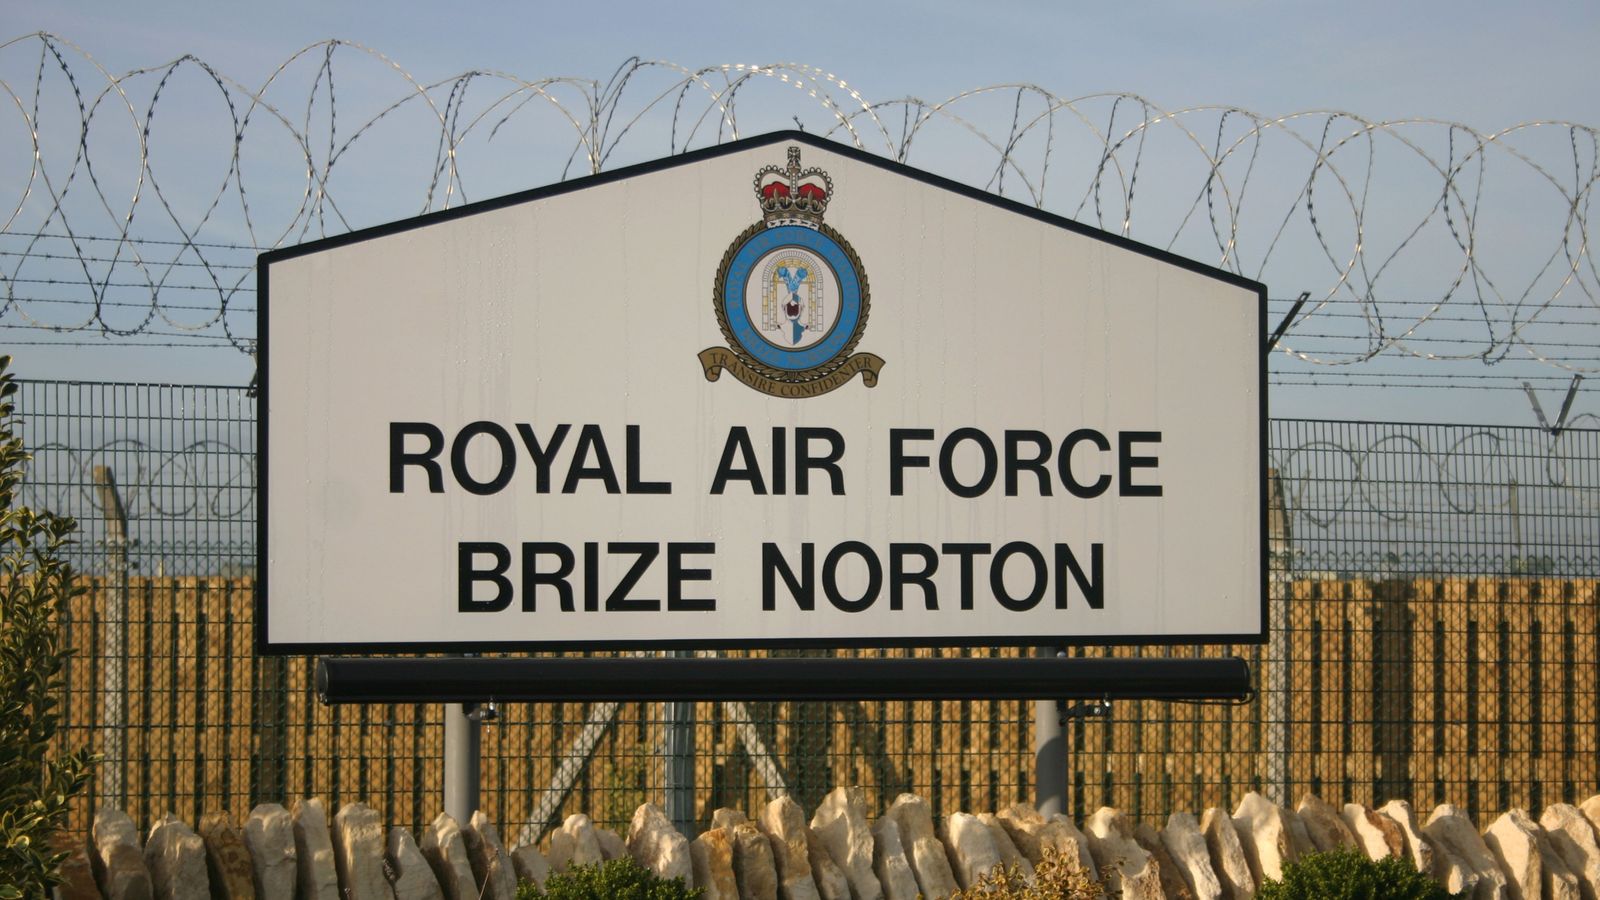 Royal Air Force unlawfully discriminated against white male recruits in bid to boost diversity, inquiry finds